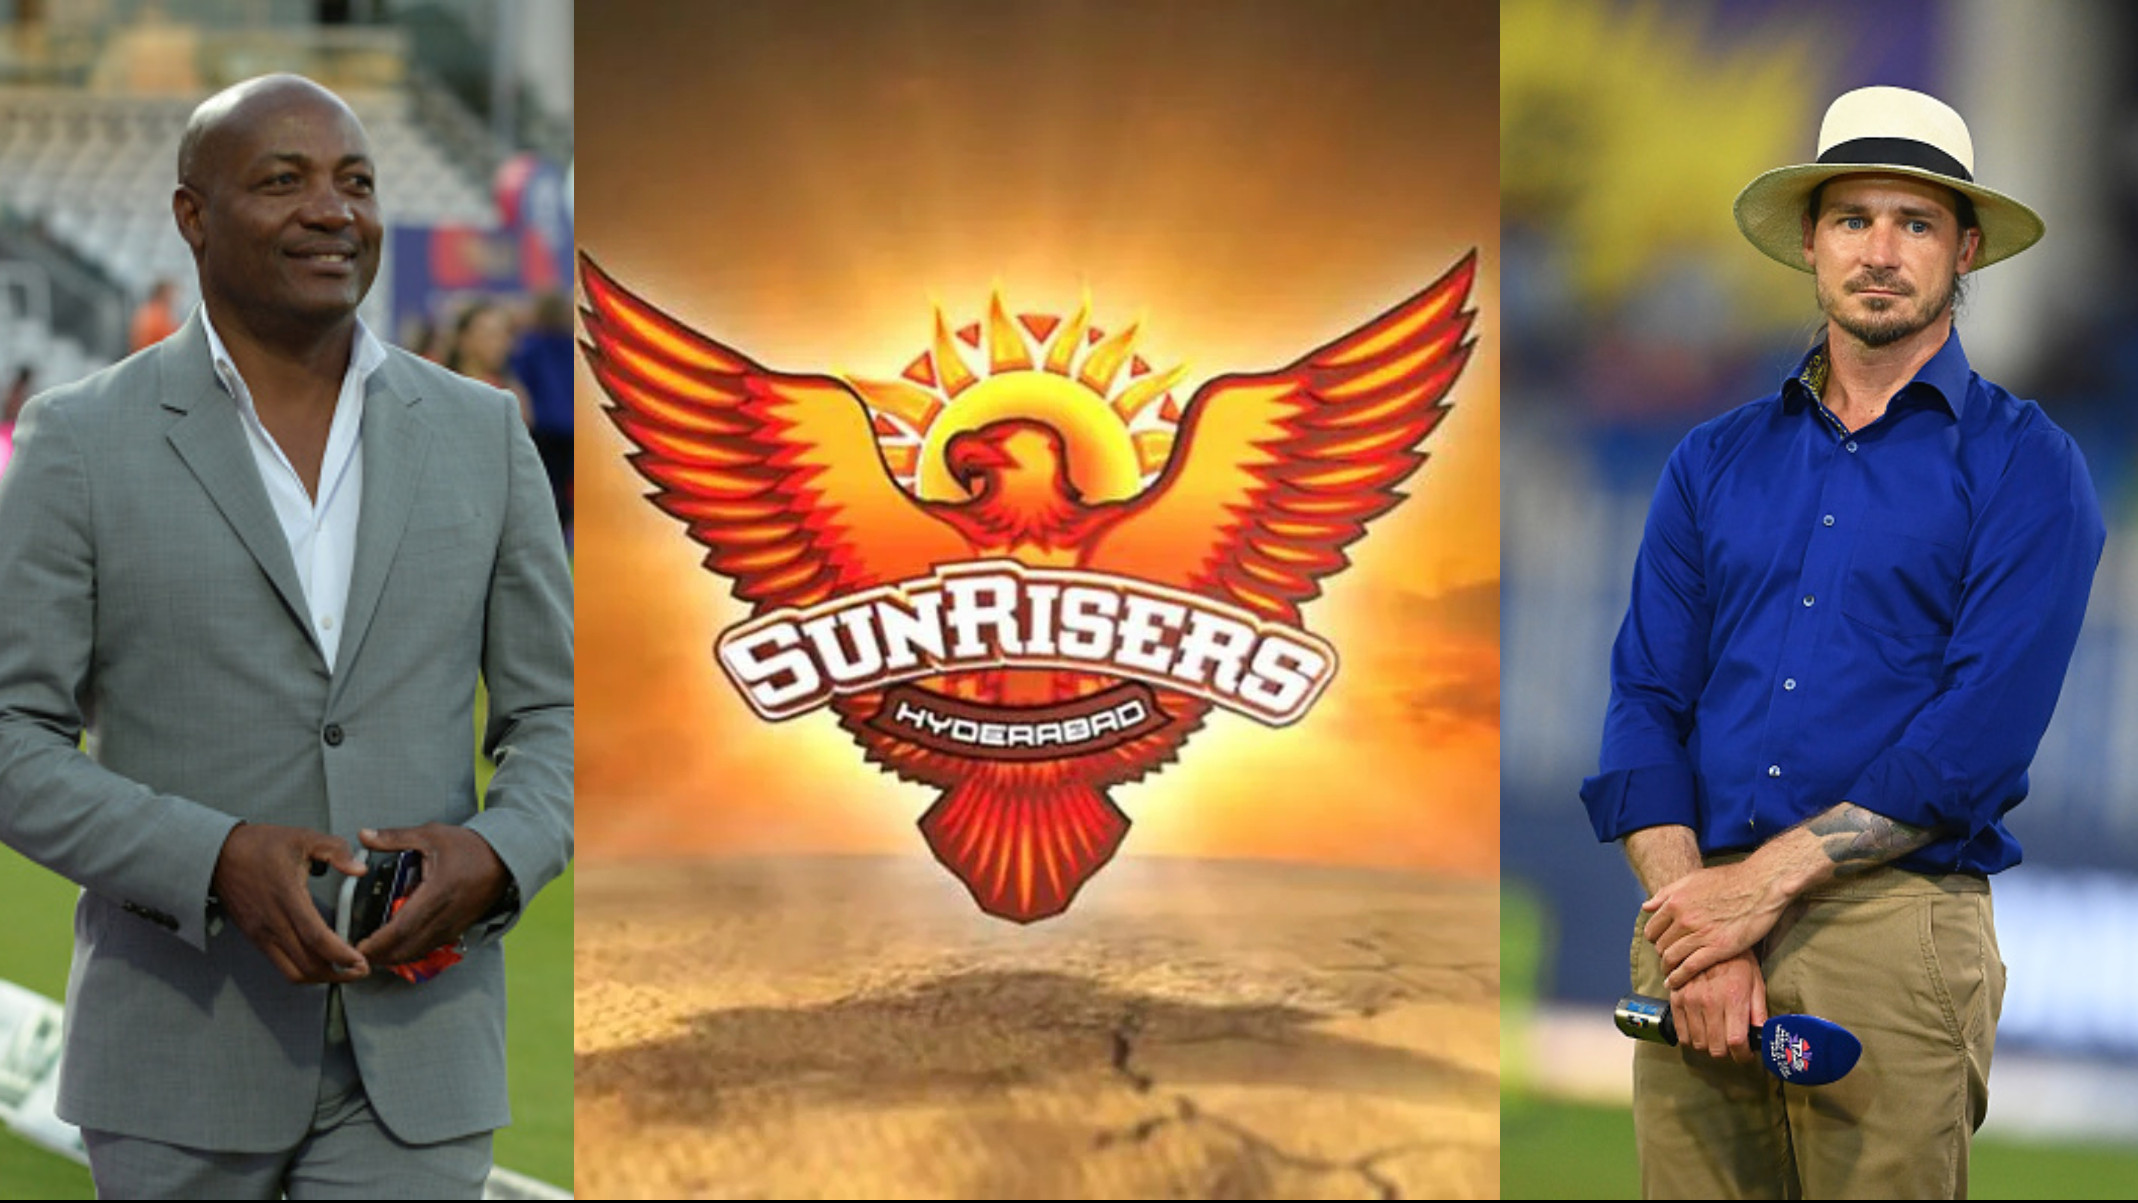 IPL 2022: Sunrisers Hyderabad (SRH) announces new additions to their coaching staff